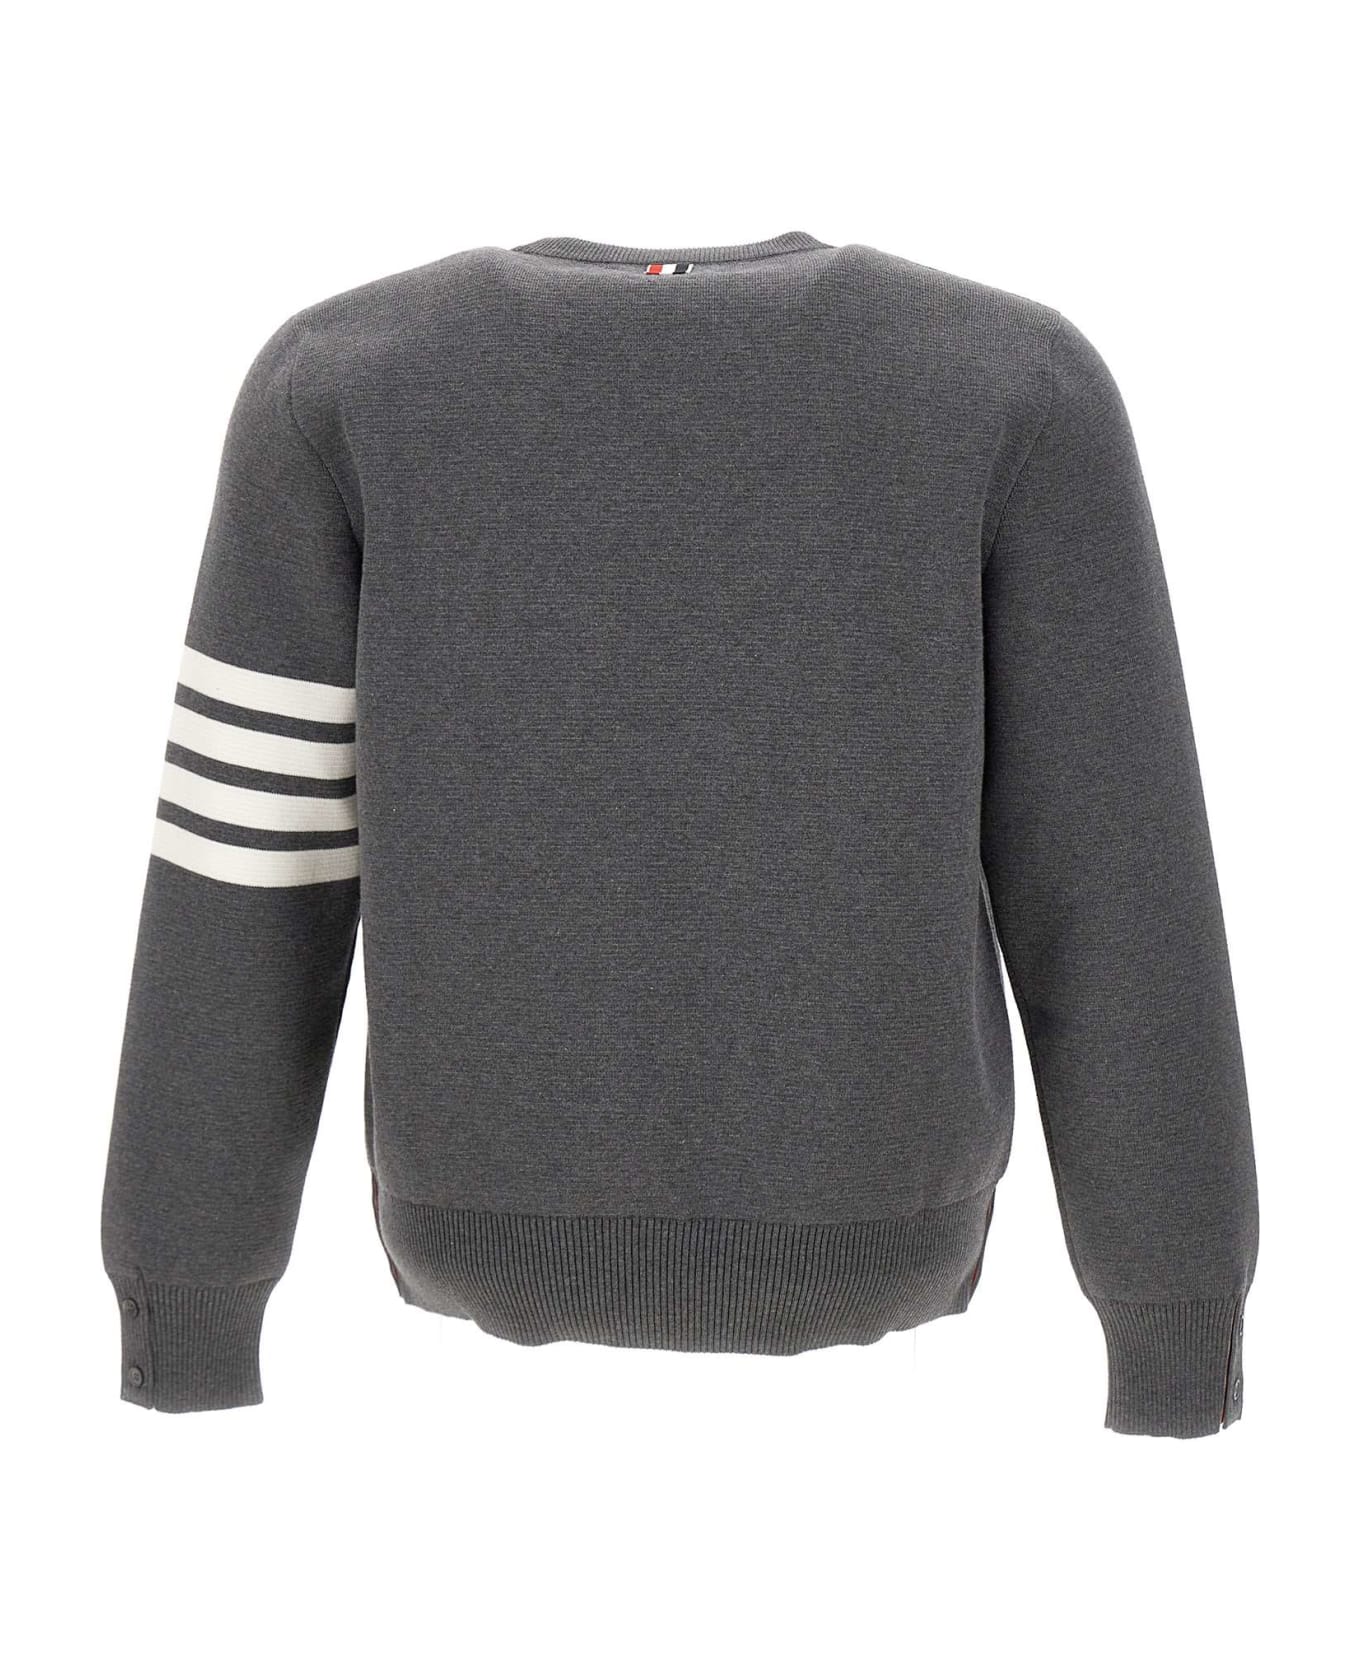 Thom Browne 'milano Stitch' Cotton Pullover - Med Grey